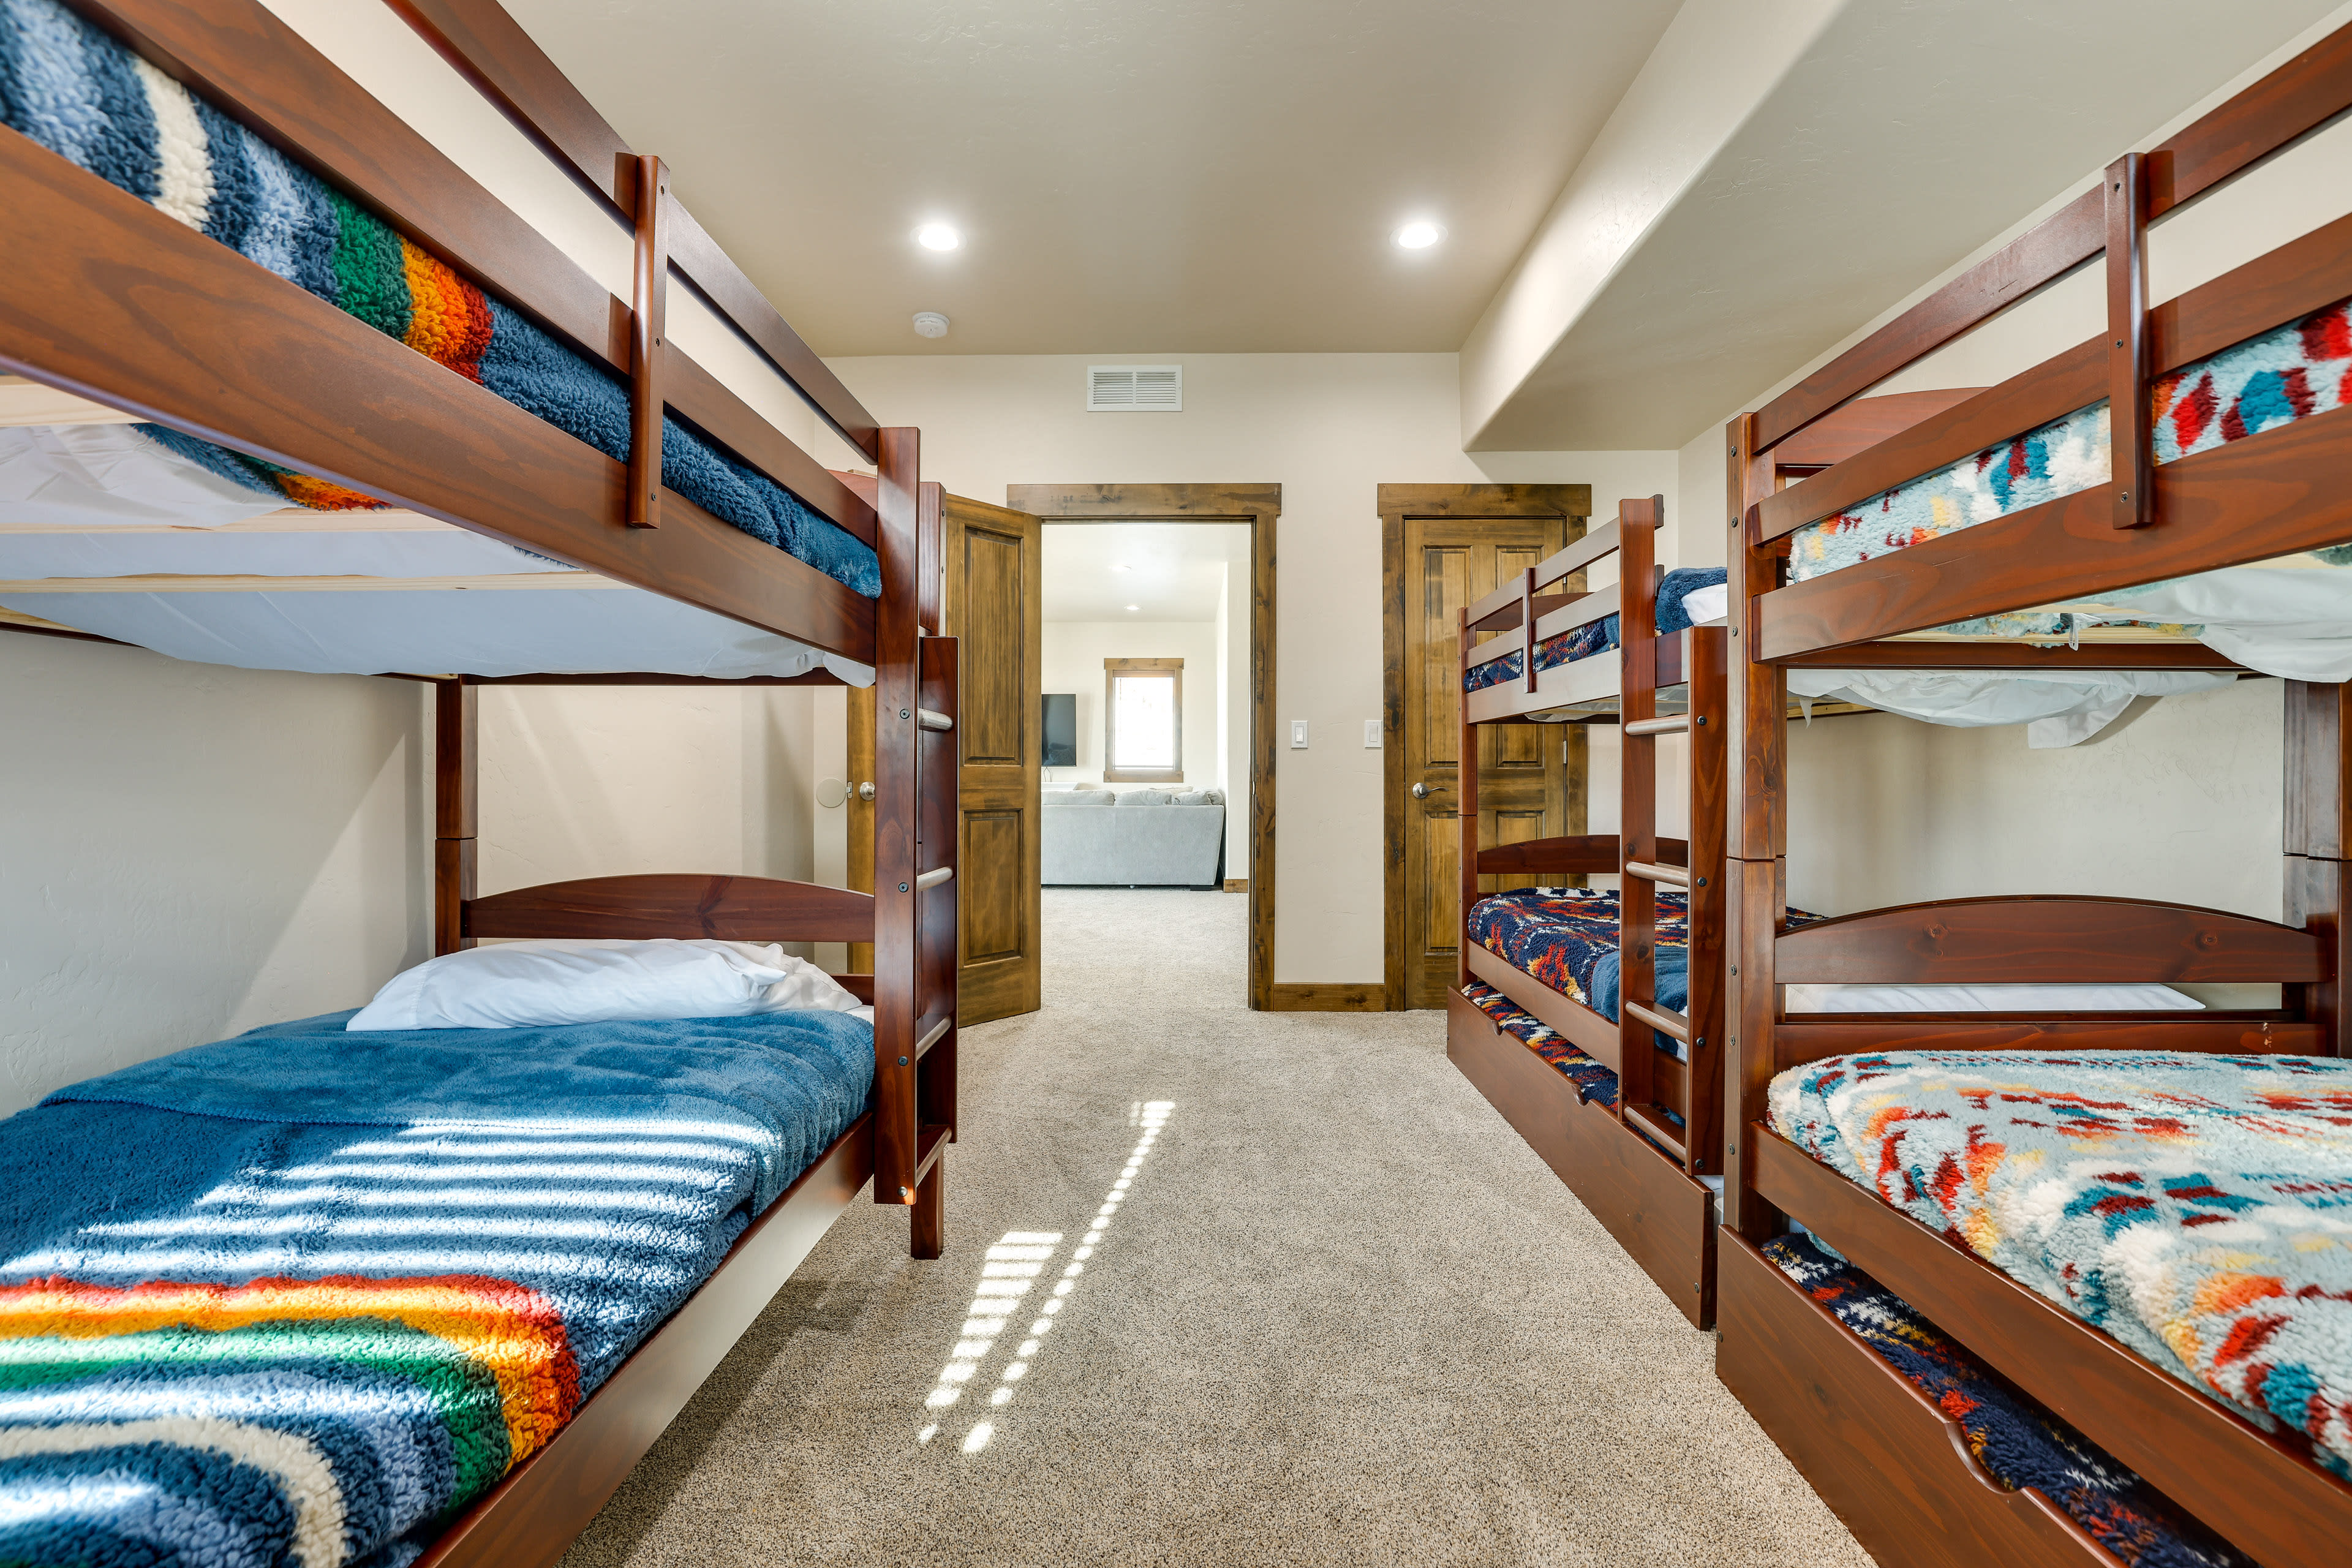 Bedroom 4 | 2 Twin Bunk Beds w/ 2 Trundles | Twin Bunk Bed | Entry Level